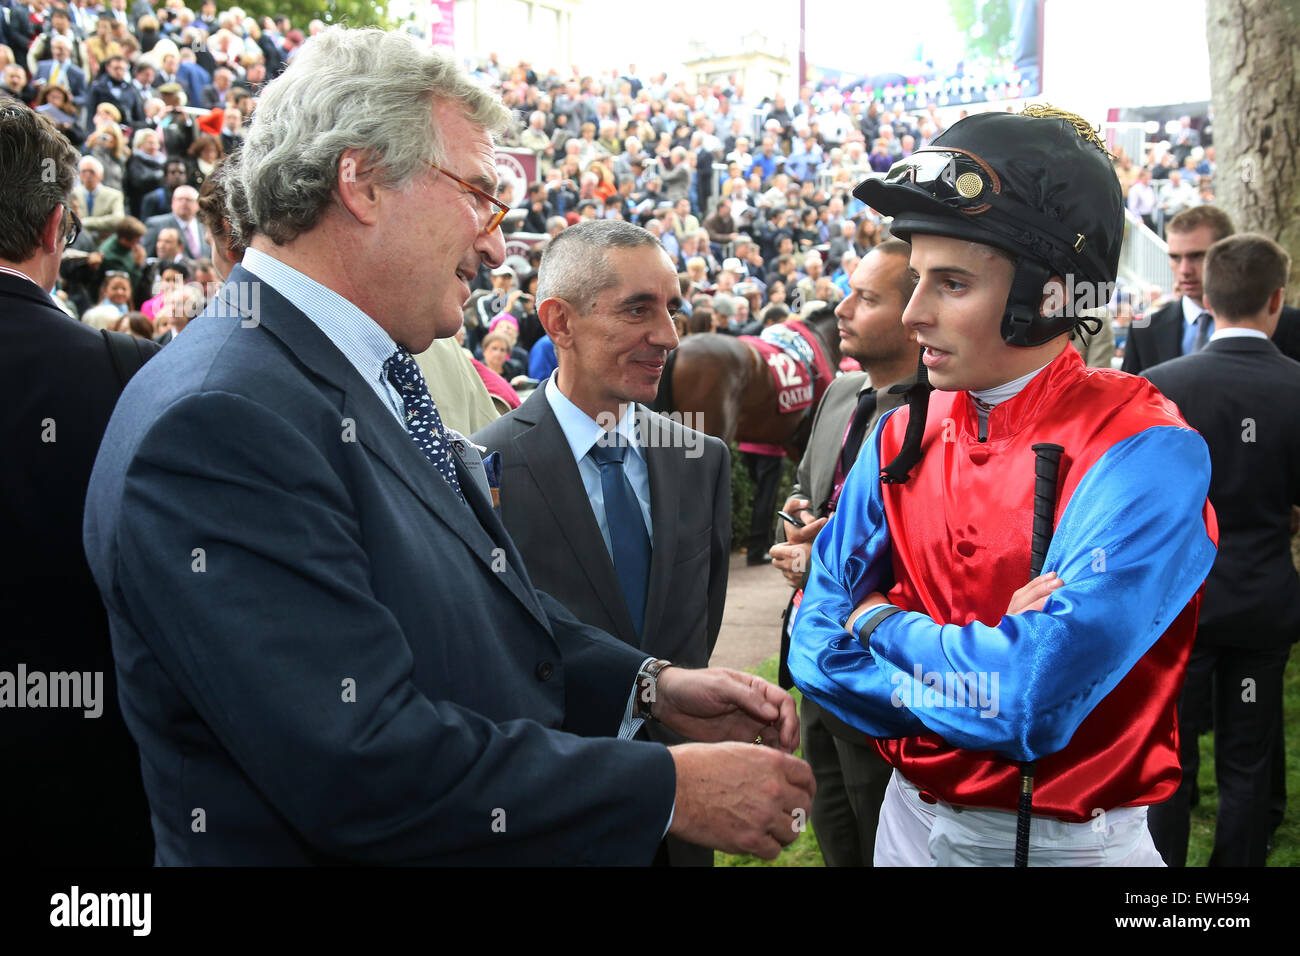 Paris, France, Georg Baron von Ullmann (left), a private banker, Jean-Pierre Carvalho, horse trainer and William Buick, Jockey Stock Photo